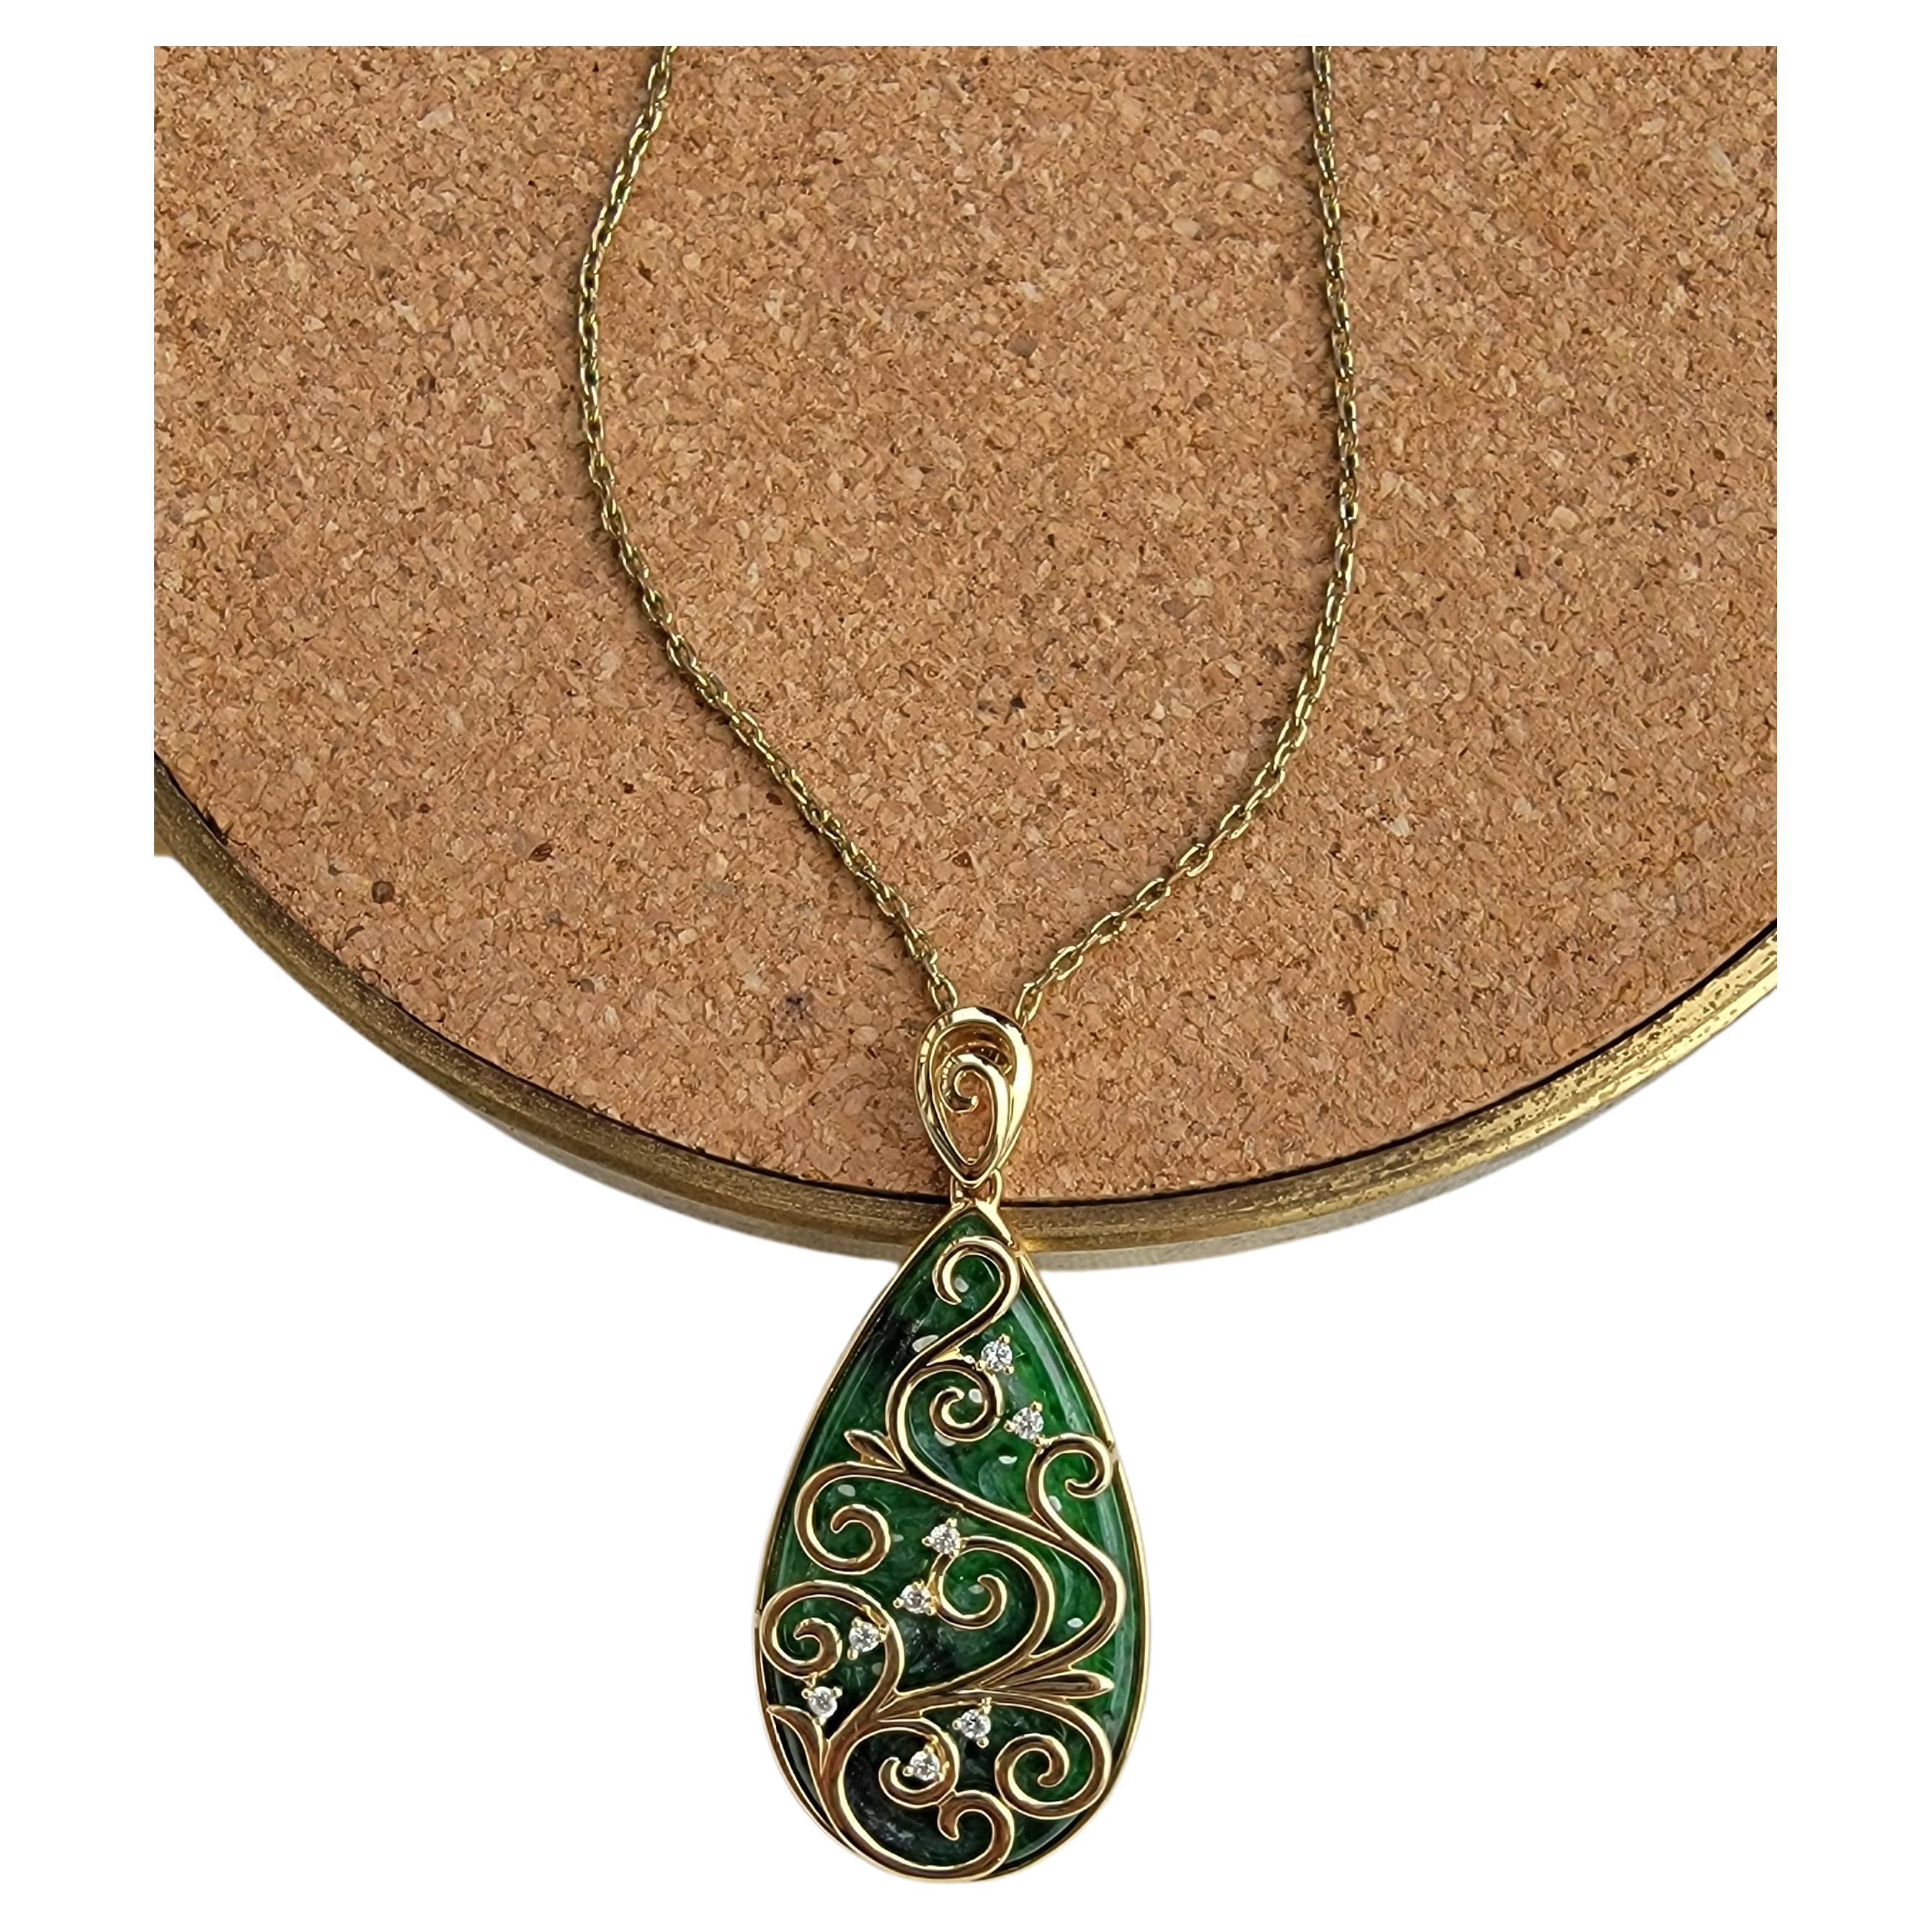 This Pendant was designed by our founder, and hand carved by our expert artisans in our Hong Kong workshop. We use 18K Yellow Gold and top quality Diamonds to bring out the best in the Jade carvings. The luster and sparkle of diamonds, the warmth of